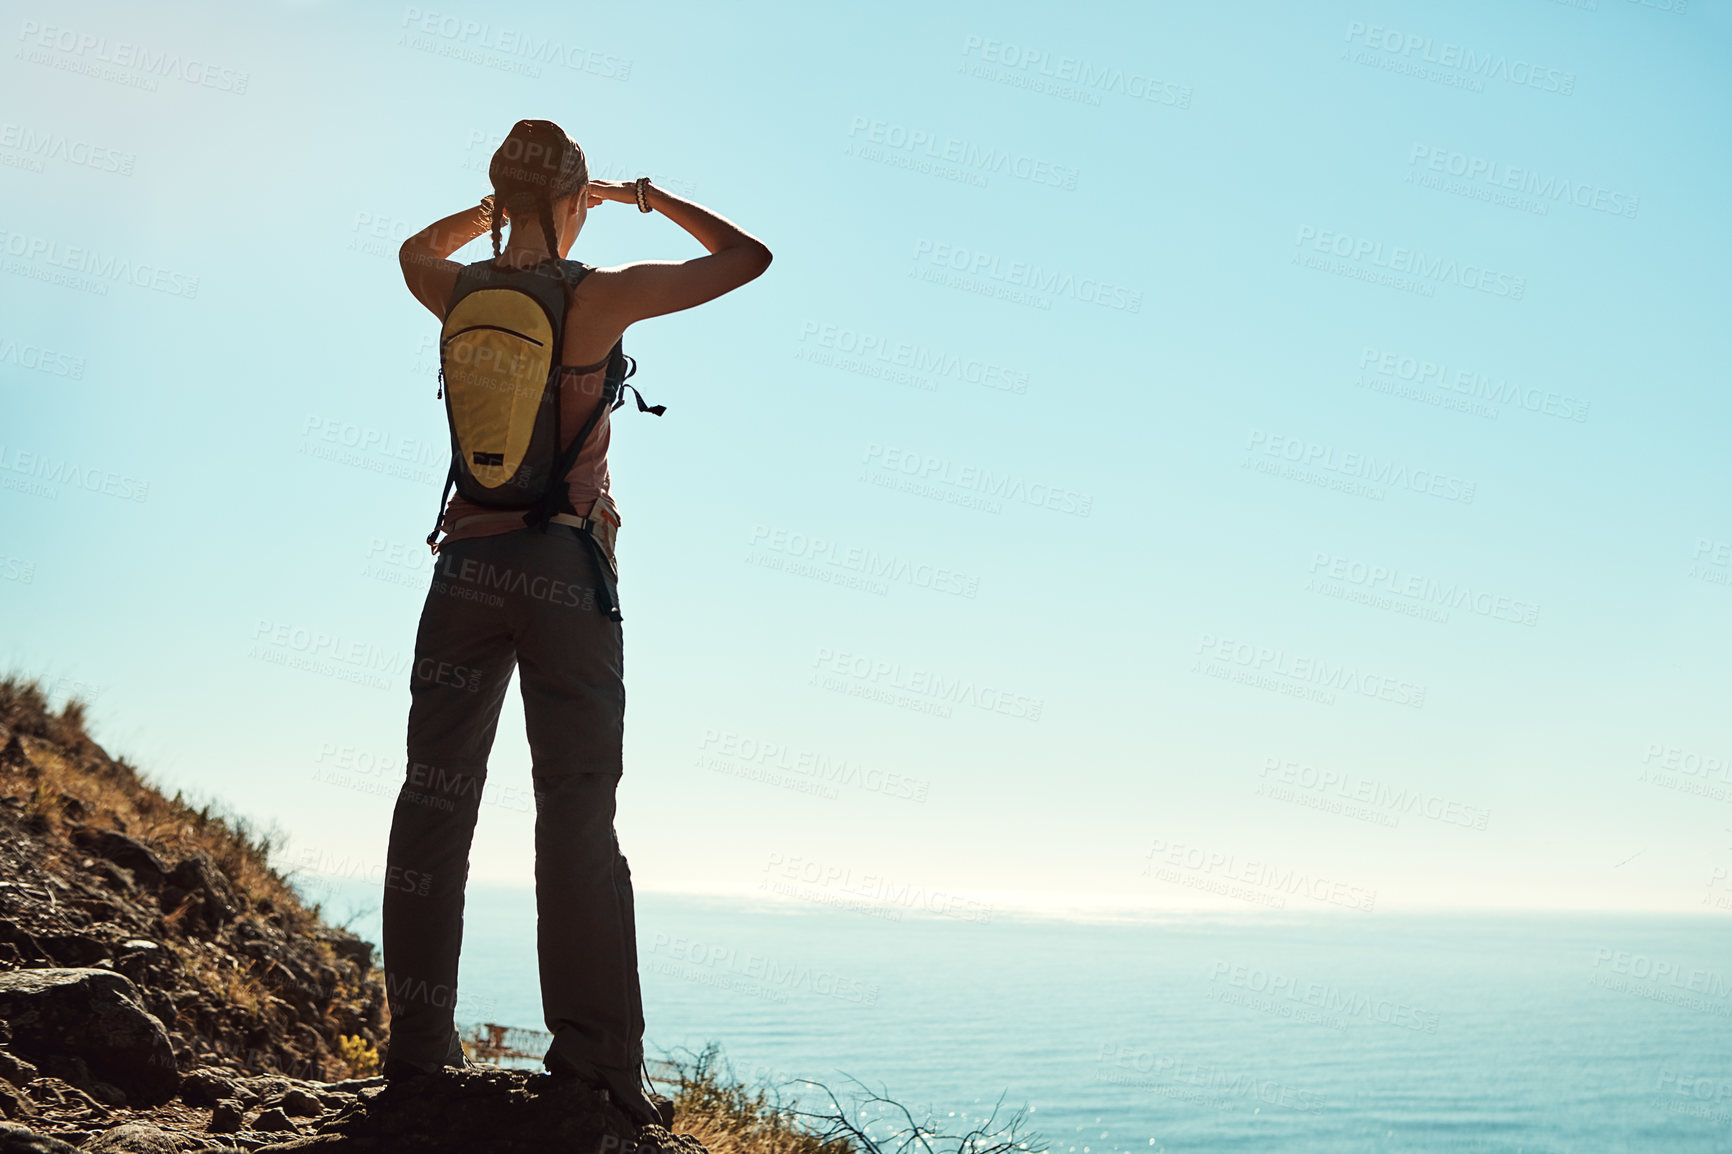 Buy stock photo Rear view shot of a young woman admiring the view from the top of a mountain